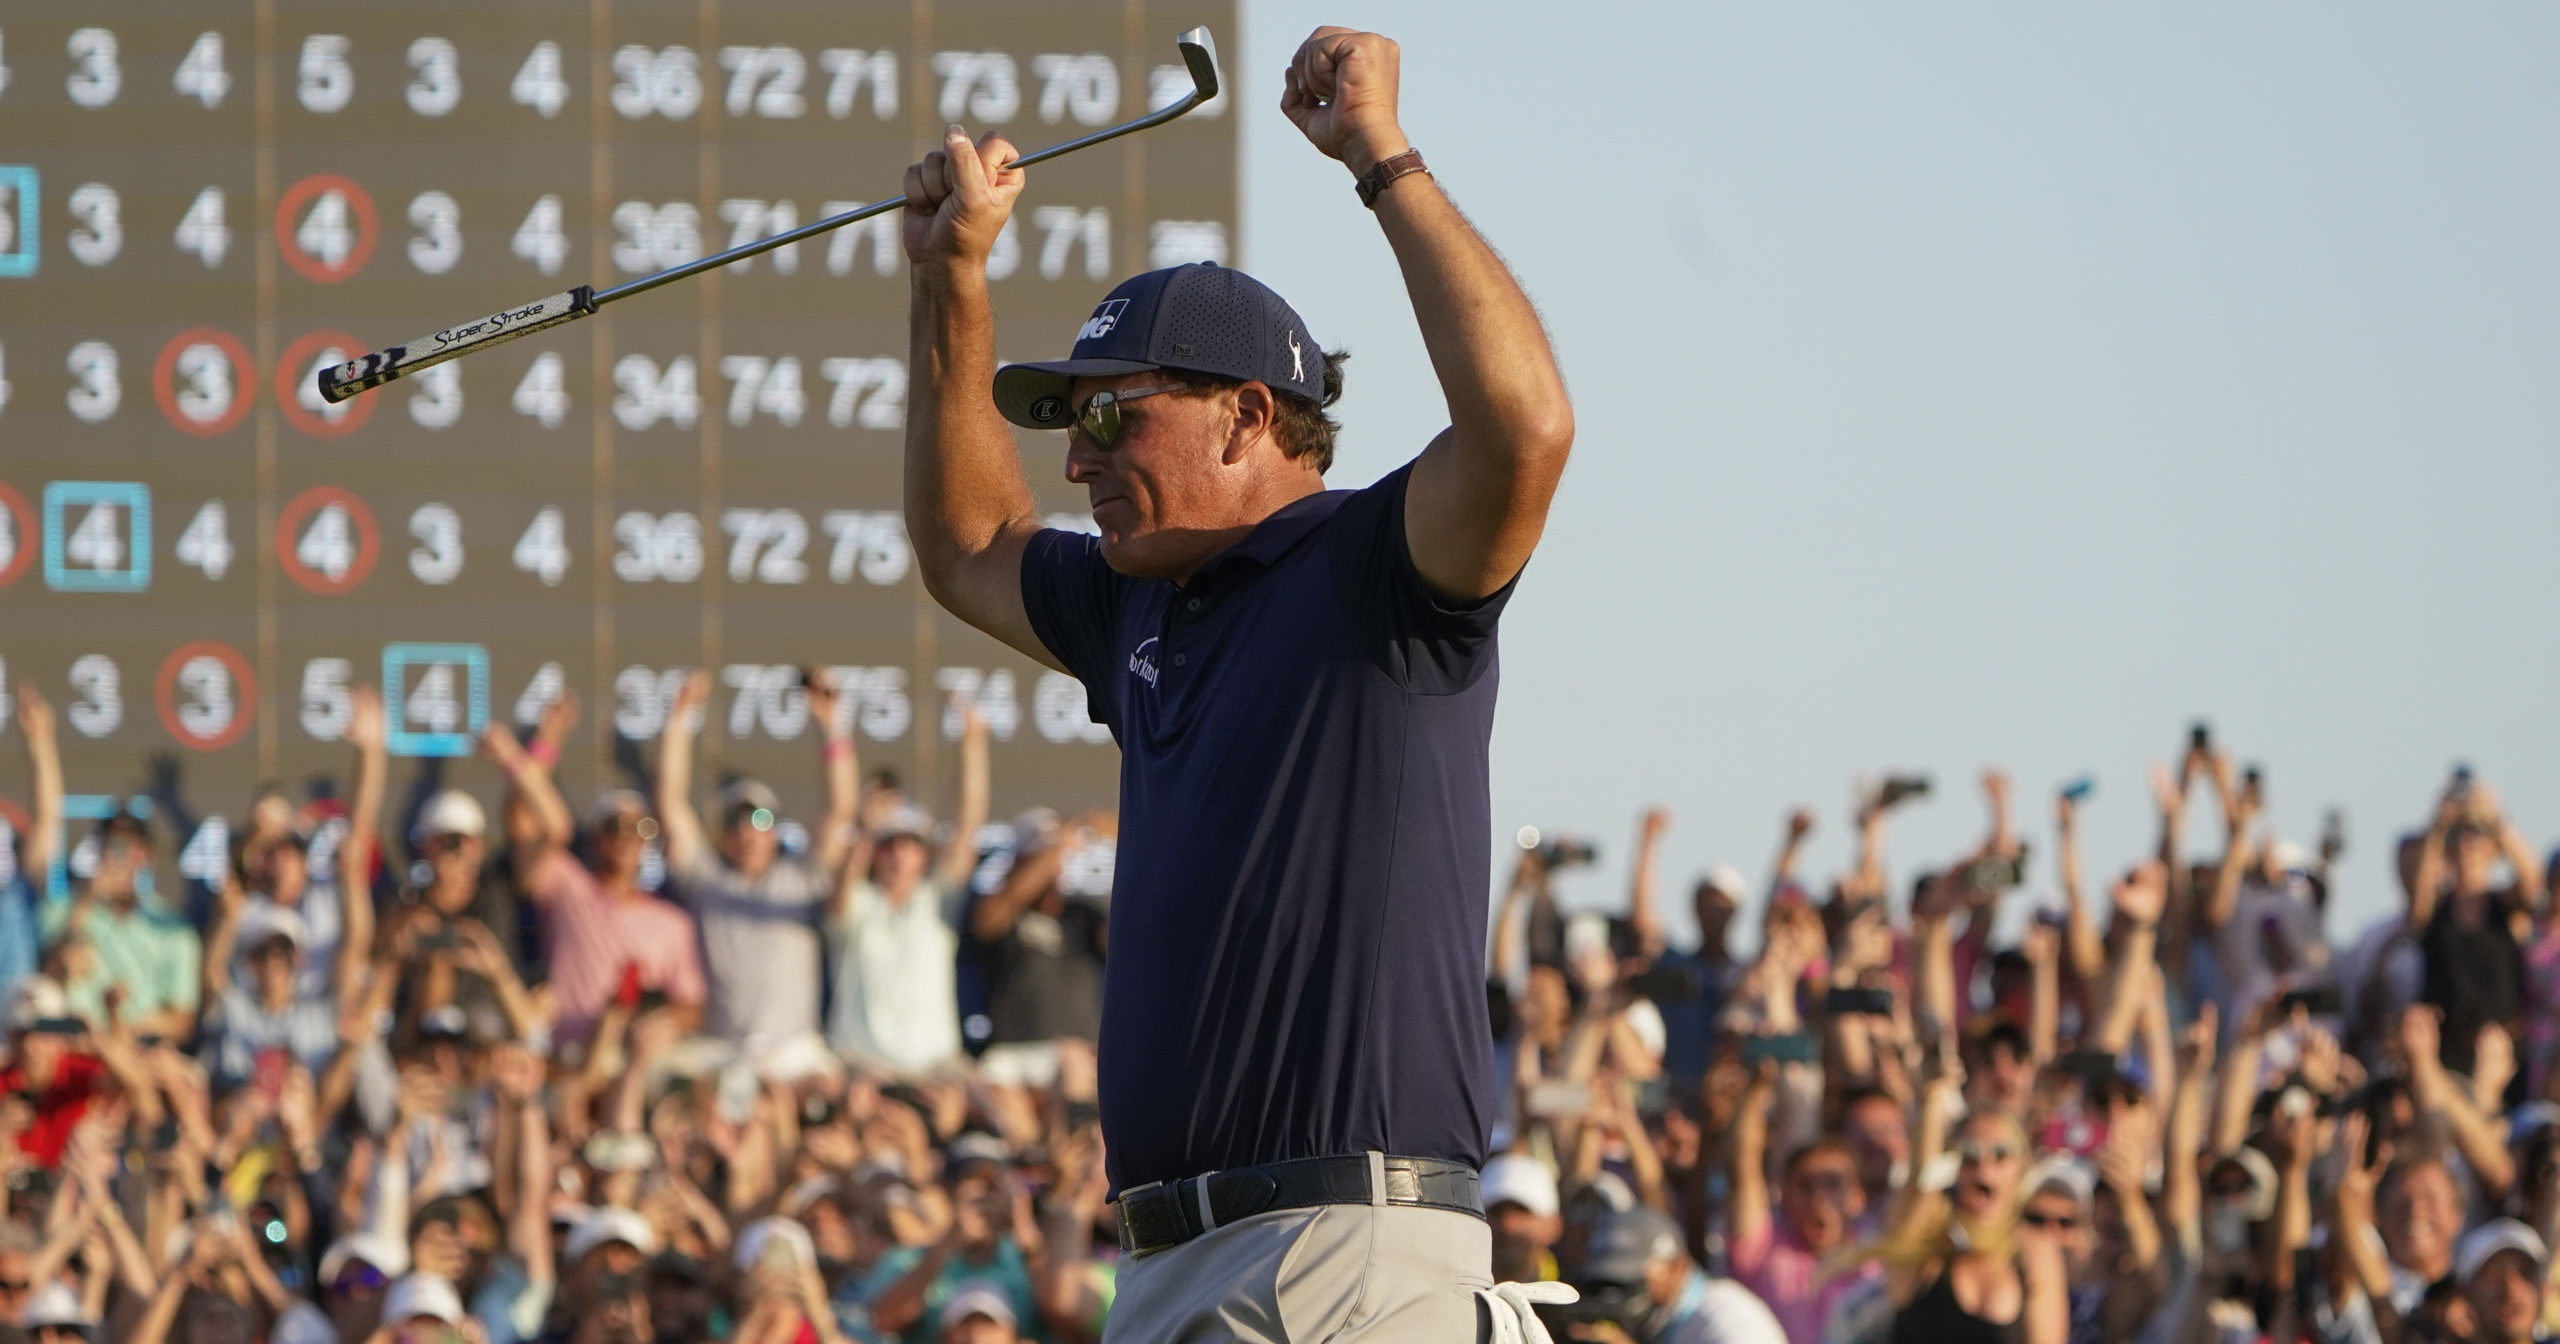 Phil Mickelson celebrates after winning the final round of the PGA Championship on the Ocean Course at Kiawah Island, South Carolina, on Sunday.